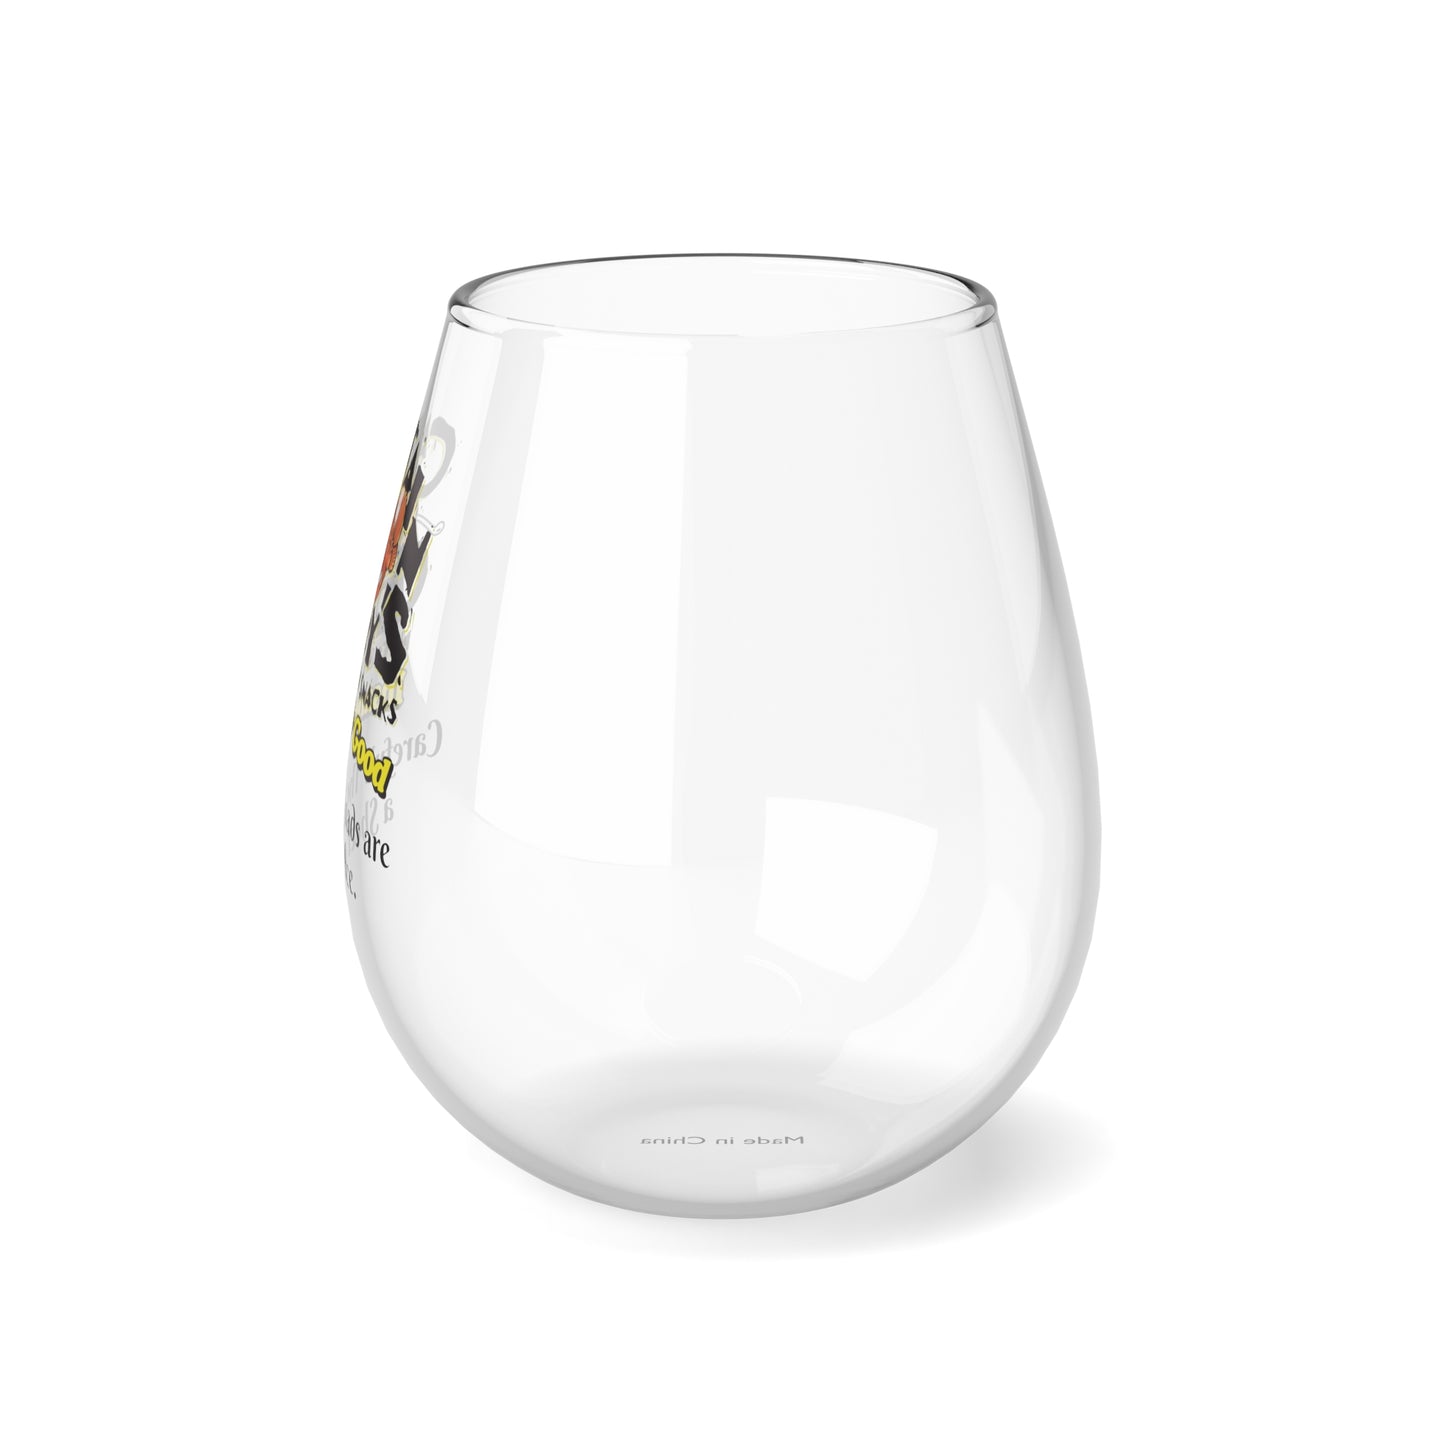 Captain Crazy's Stemless Wine Glass "Careful. The Roads are a Sheet of Ice."